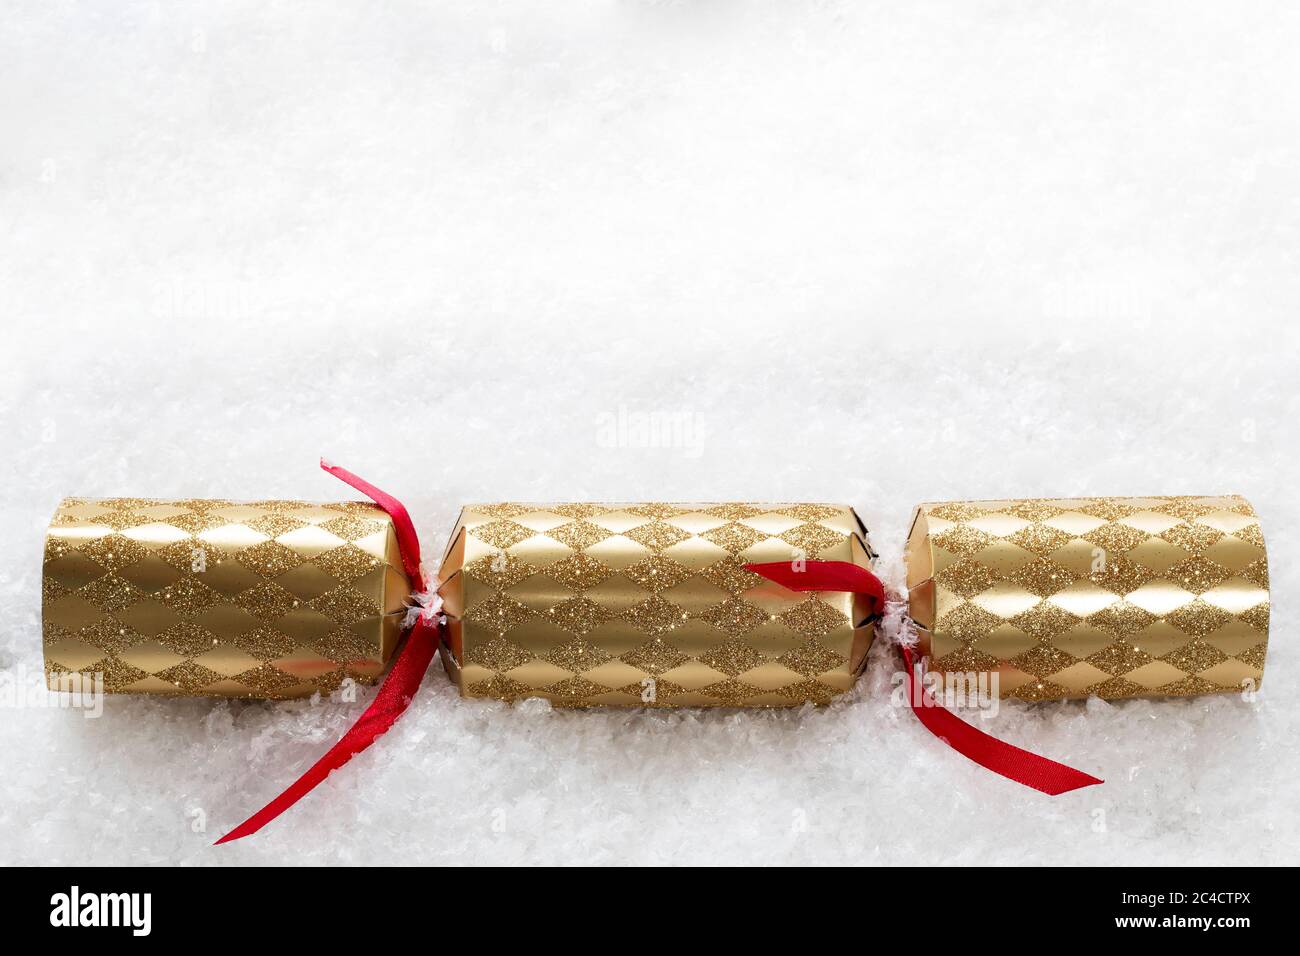 Gold Christmas cracker in the snow with copy space for adding your own message Stock Photo